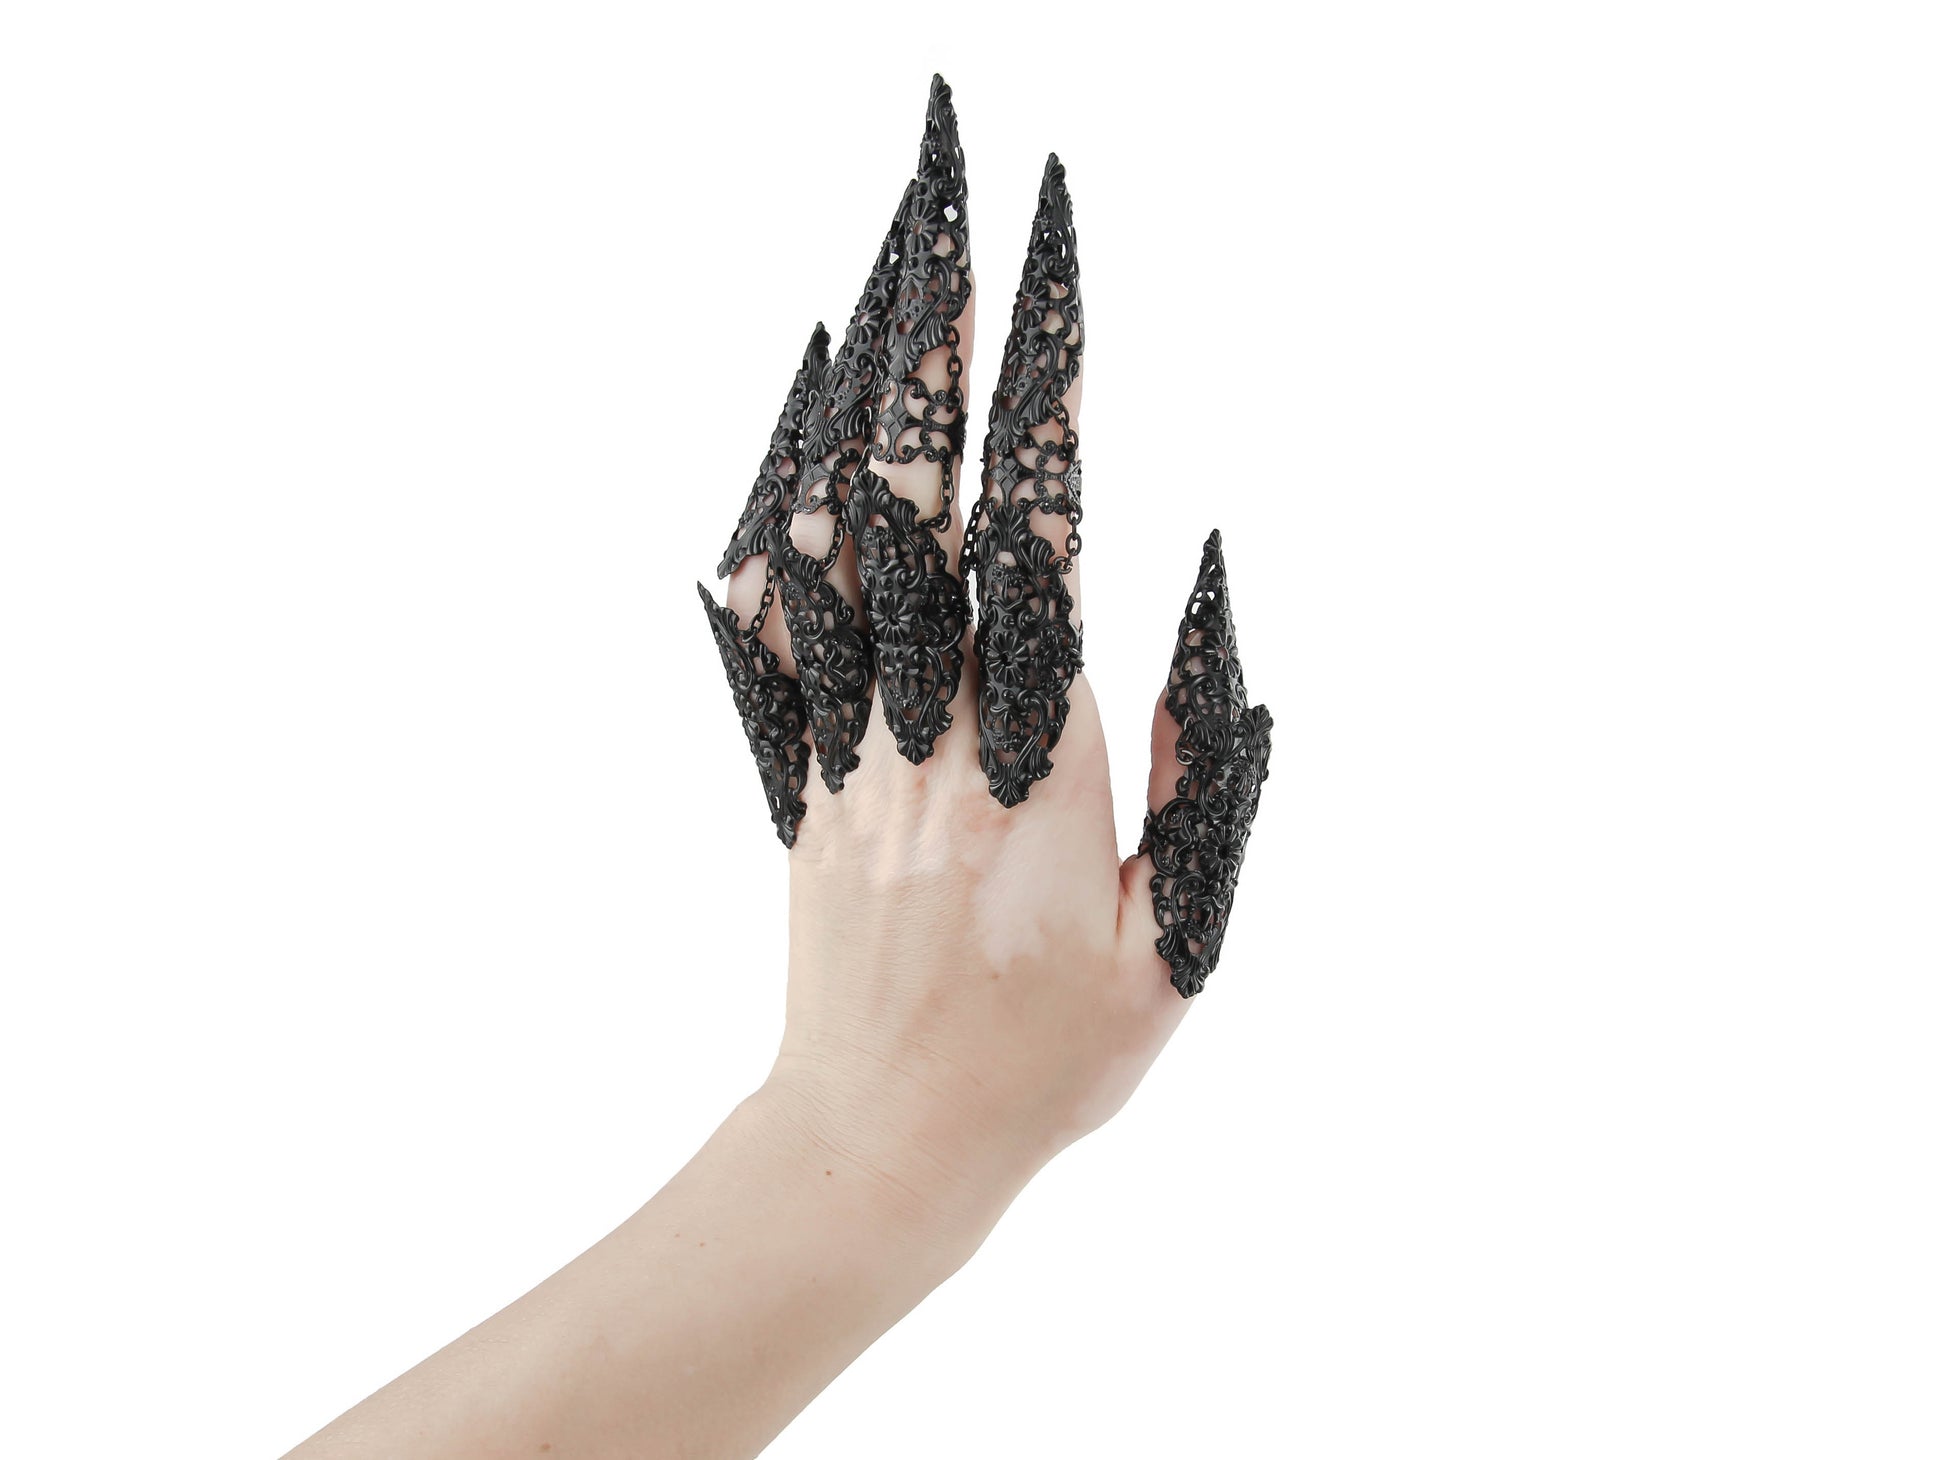 Dramatic Myril Jewels black finger armor rings, embracing a neo-gothic design, adorn a hand against a white backdrop. Perfect for gothic-chic, punk, and witchcore enthusiasts, these rings are a bold choice for Halloween events or to add an avant-garde edge to any outfit.